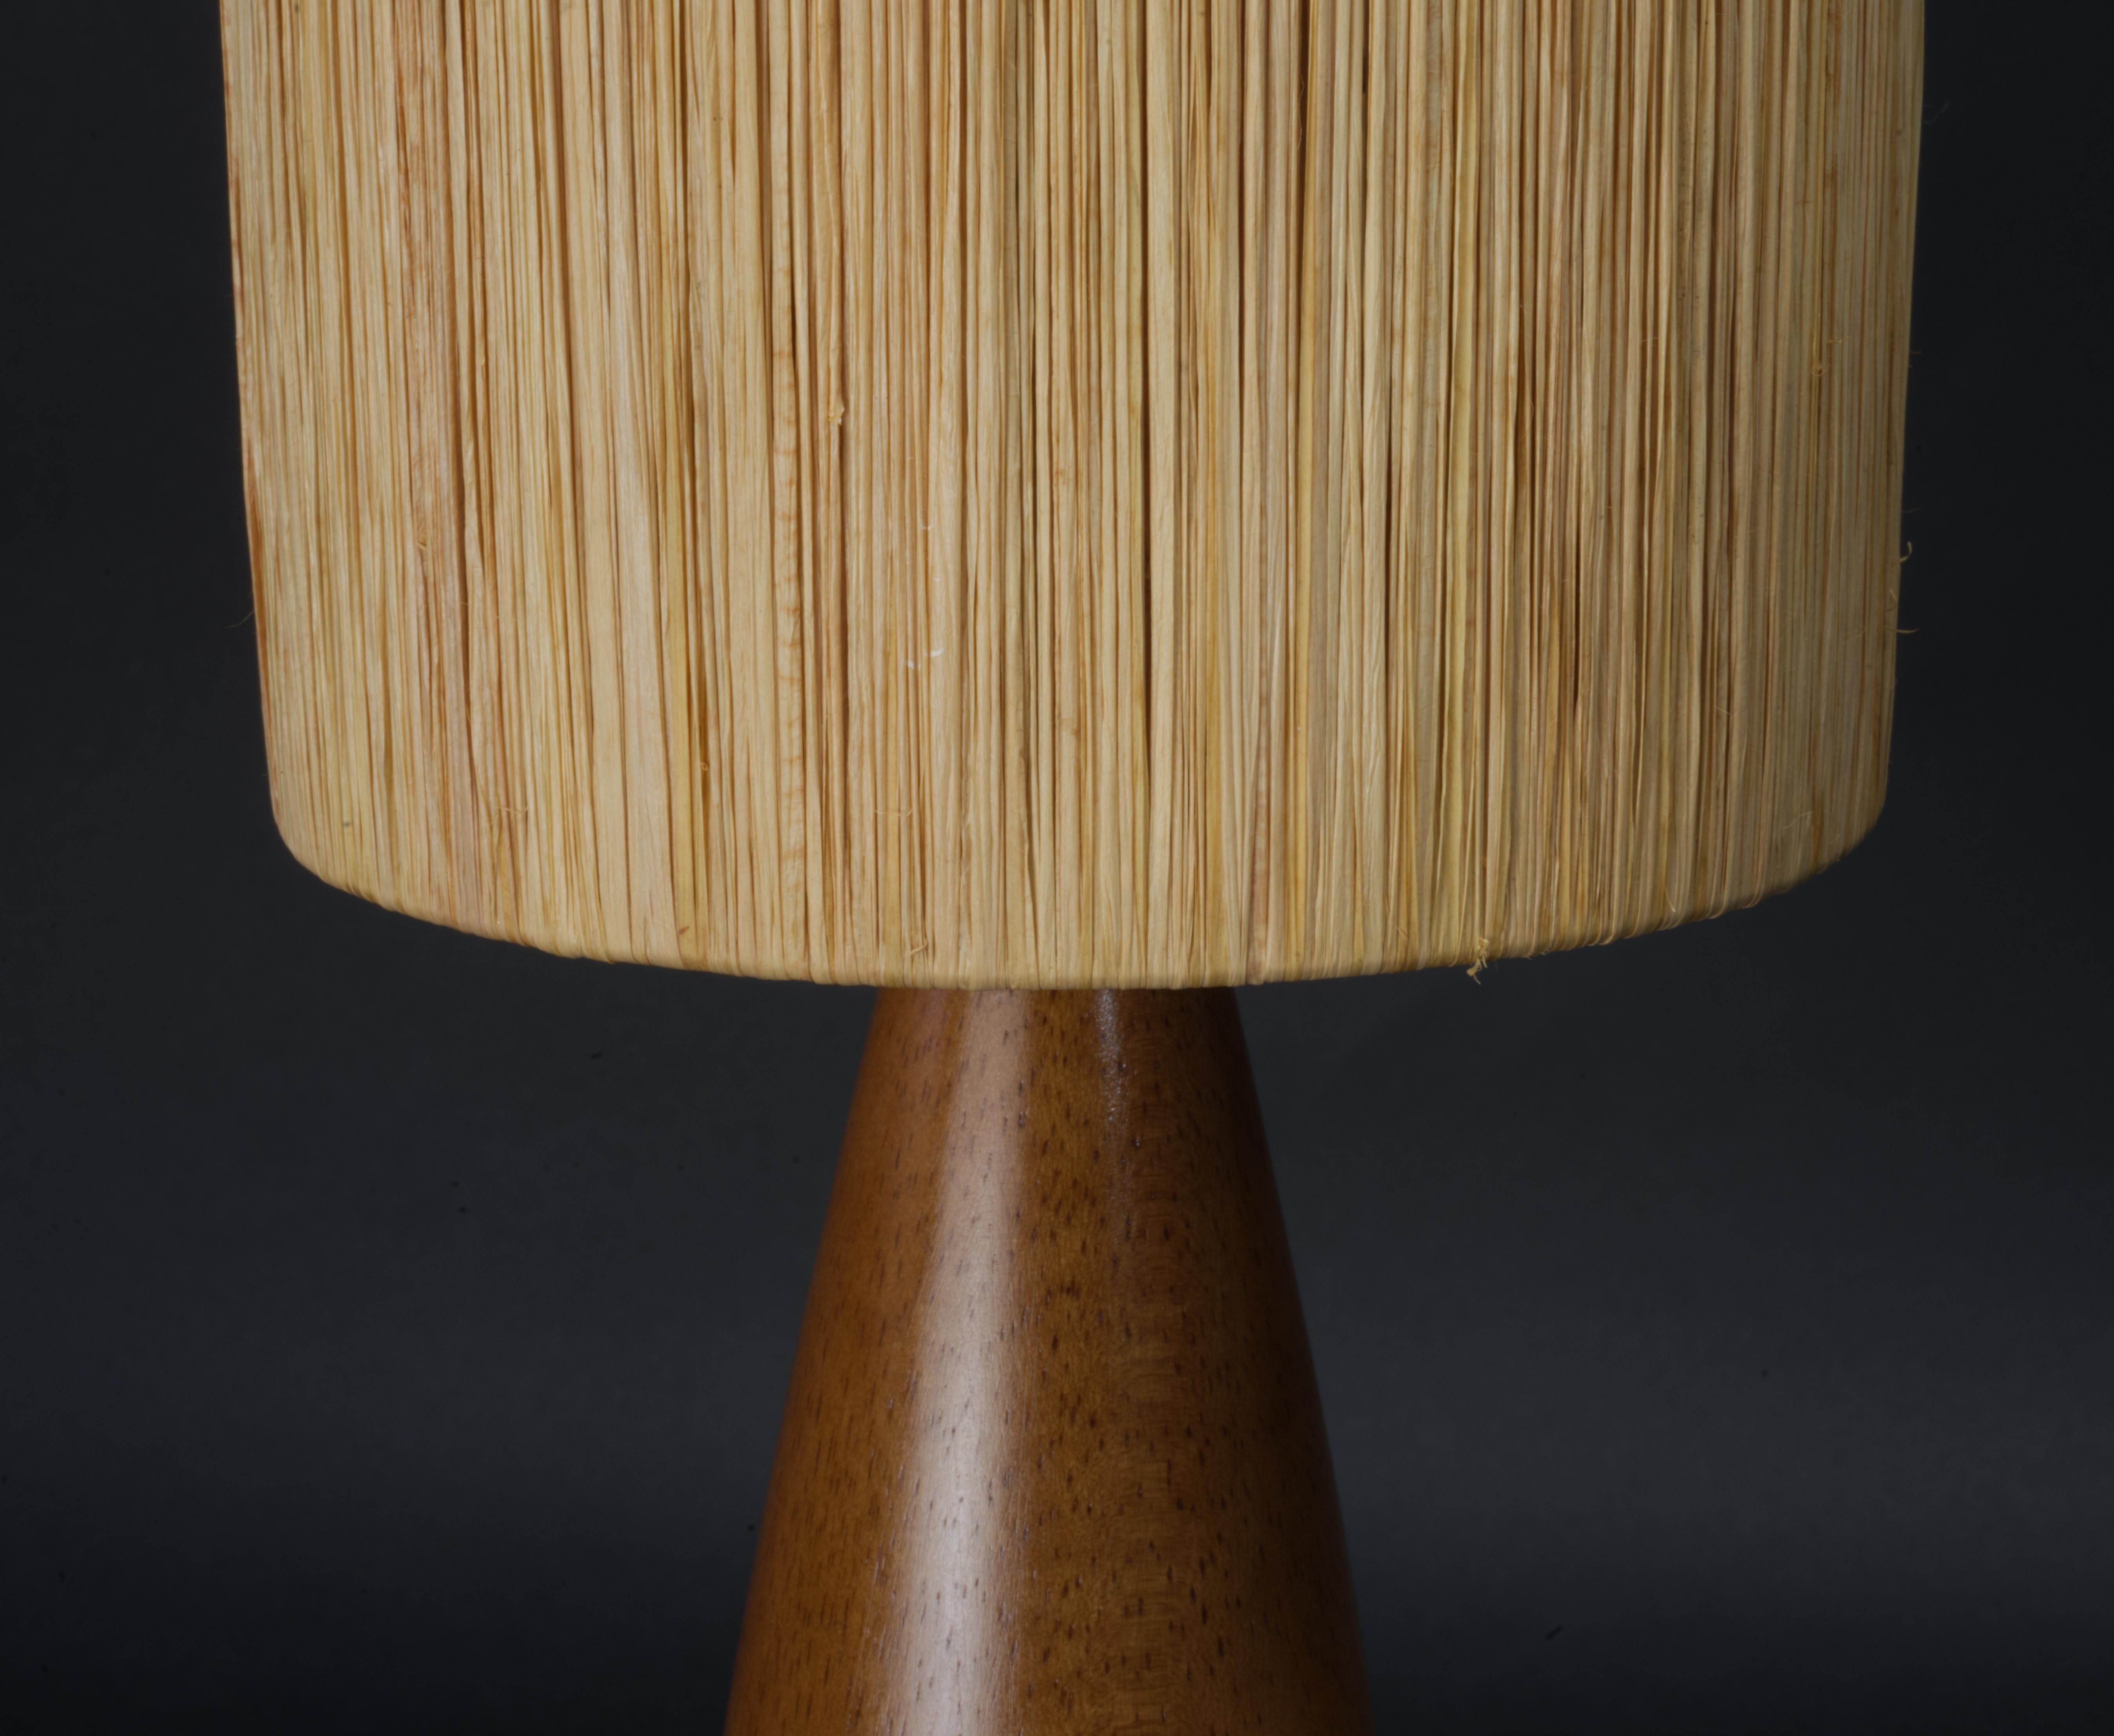 Lacquered Scandinavian Modern Teak Accent Table Lamp with Original Straw Shade, Mid Centur For Sale